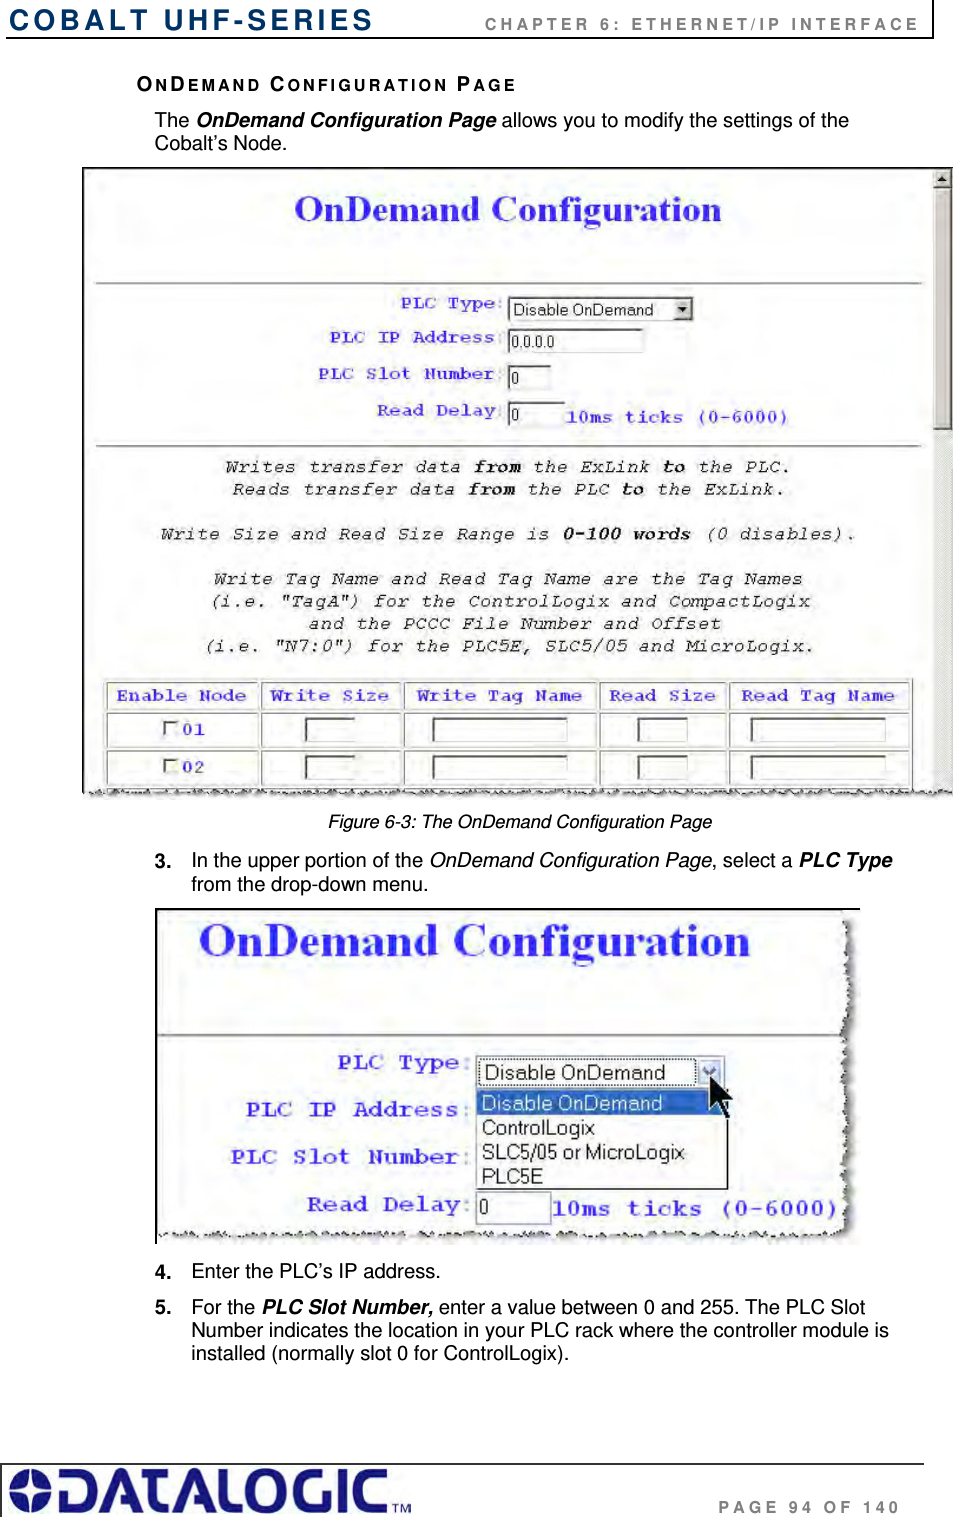 COBALT UHF-SERIES    CHAPTER 6: ETHERNET/IP INTERFACE                                     PAGE 94 OF 140 ONDEMAND CONFIGURATION PAGE The OnDemand Configuration Page allows you to modify the settings of the Cobalt’s Node.   Figure 6-3: The OnDemand Configuration Page 3.  In the upper portion of the OnDemand Configuration Page, select a PLC Type from the drop-down menu.  4.  Enter the PLC’s IP address. 5.  For the PLC Slot Number, enter a value between 0 and 255. The PLC Slot Number indicates the location in your PLC rack where the controller module is installed (normally slot 0 for ControlLogix). 